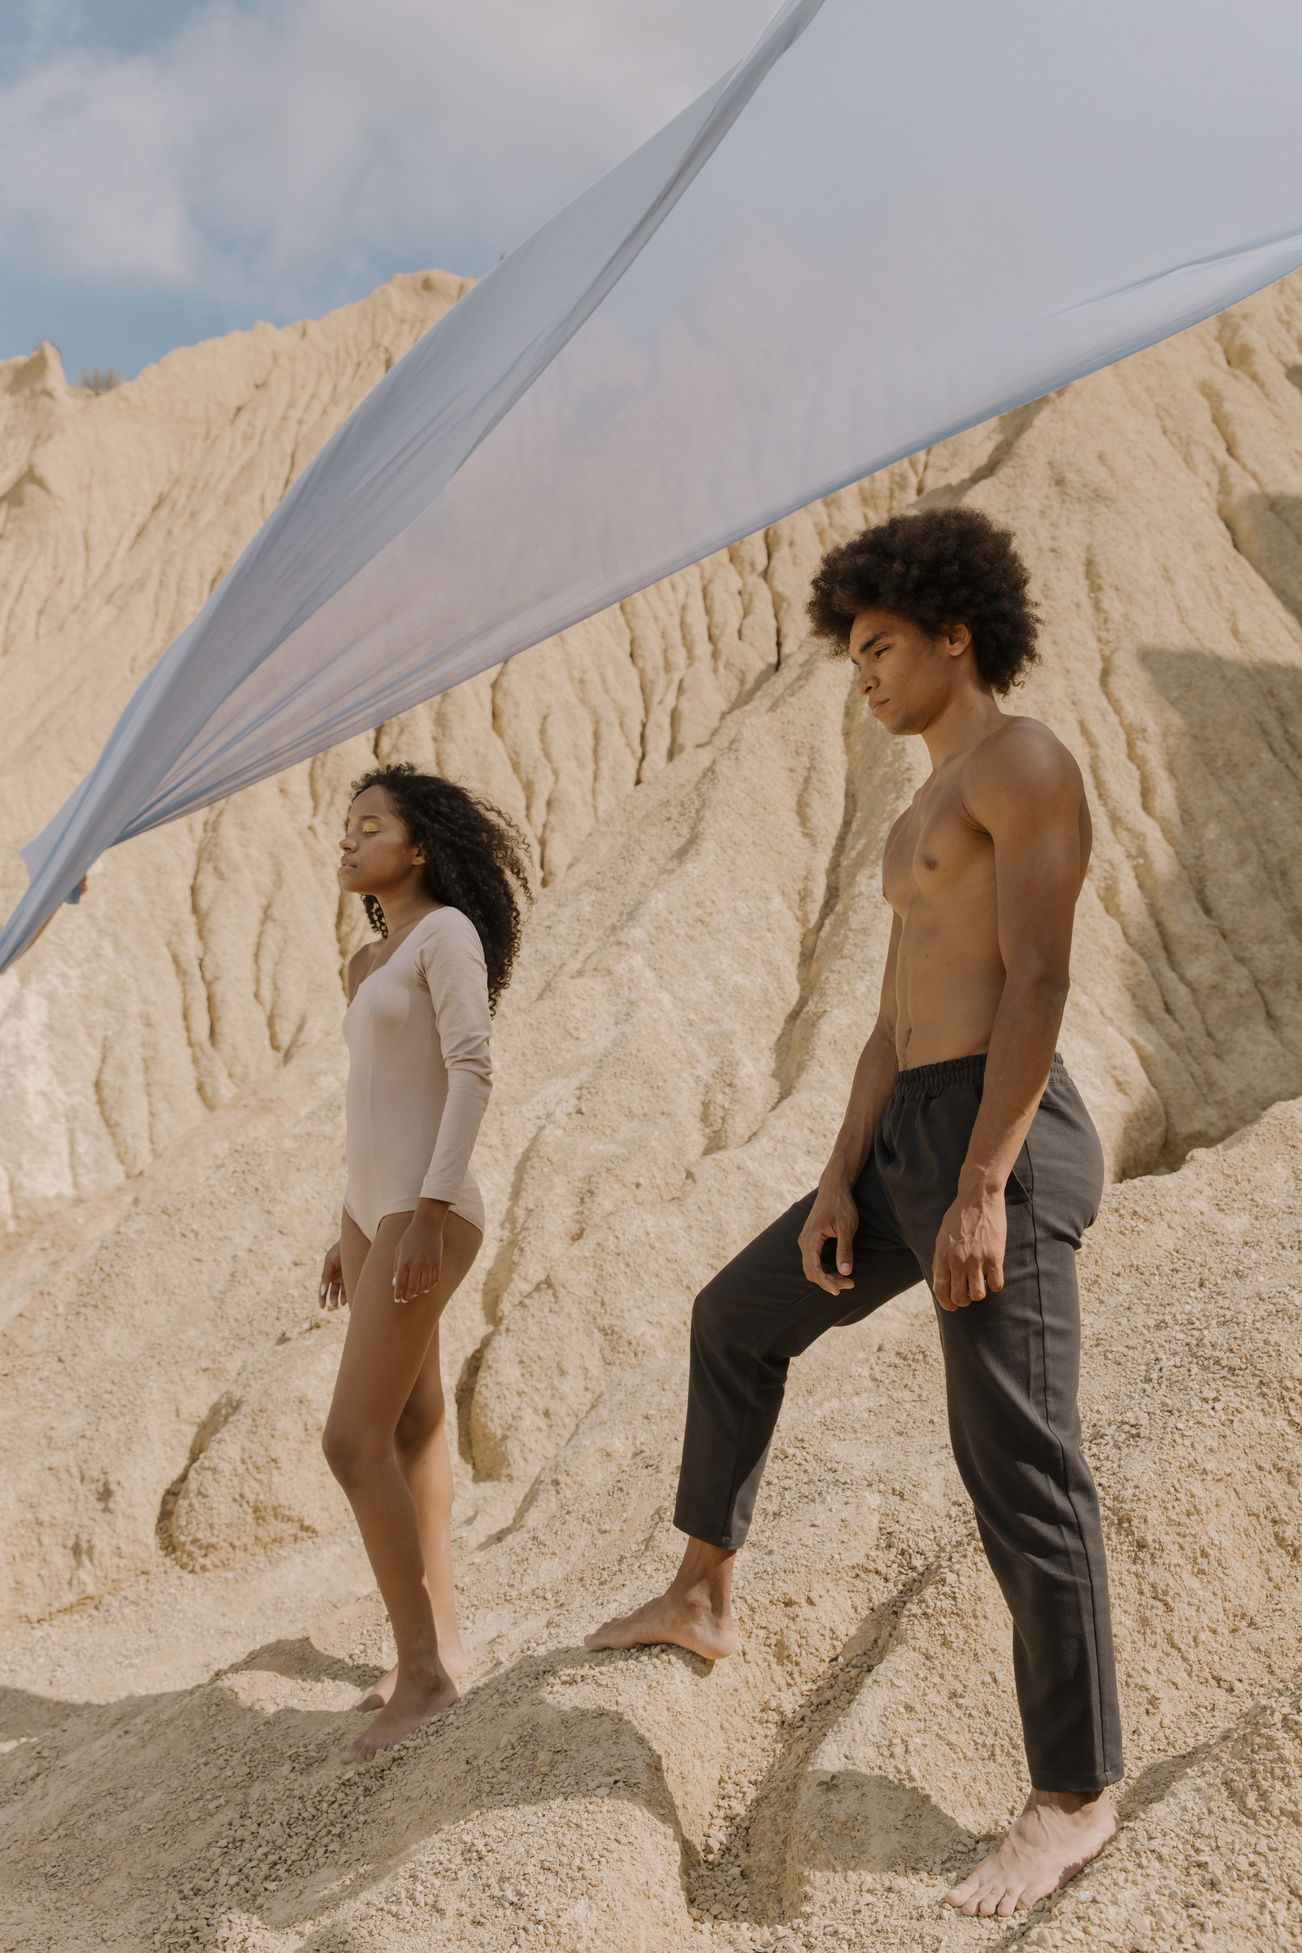 A Young Man and a Young Woman Standing on a Natural Rock Formation